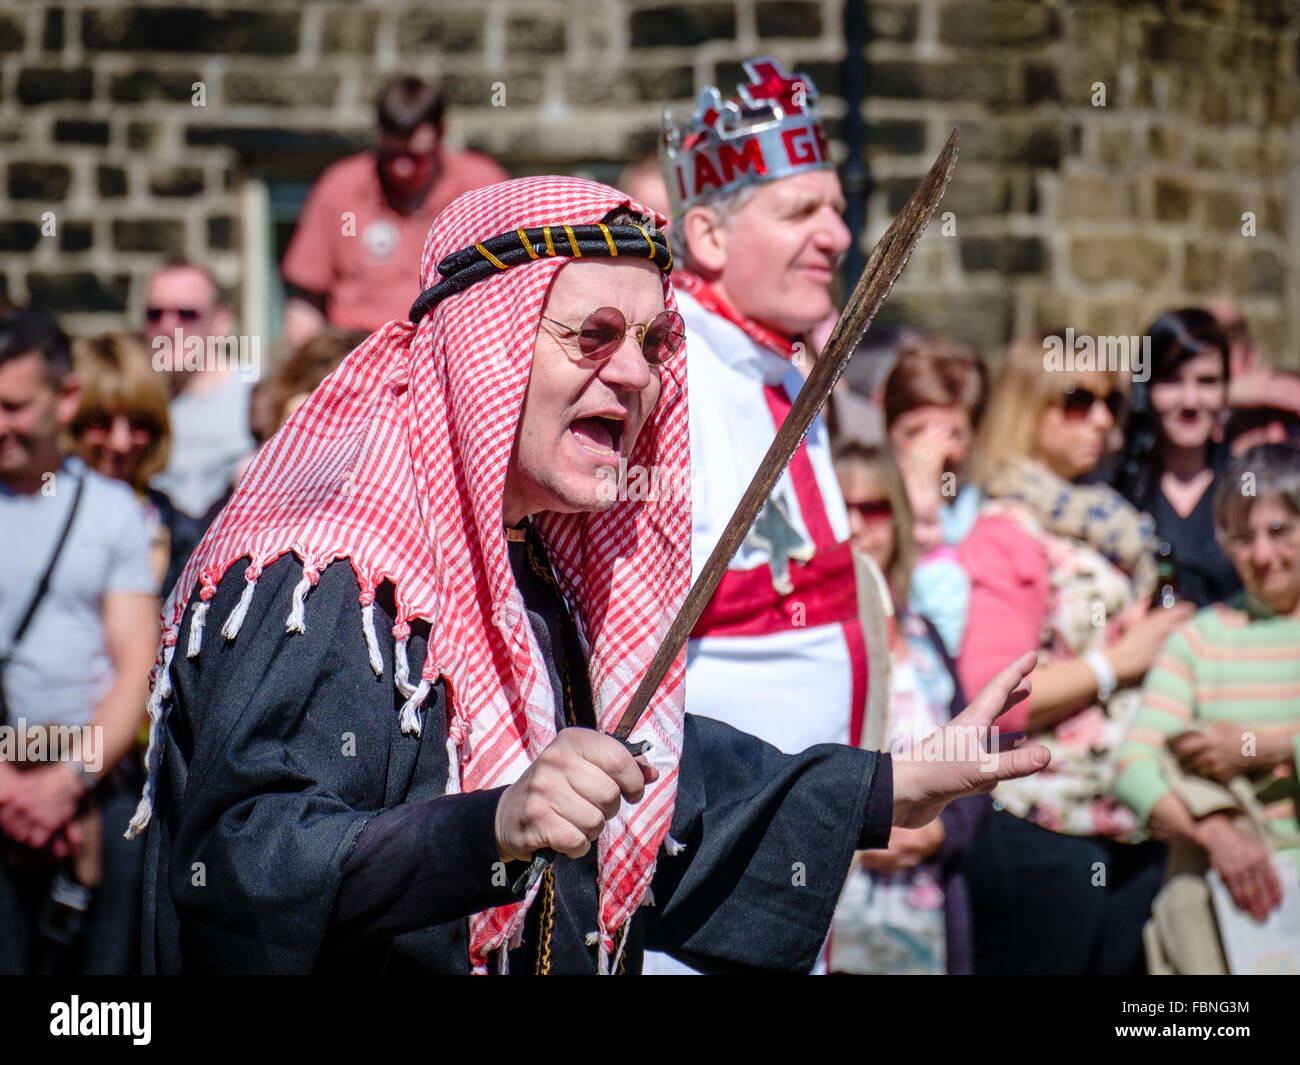 Performer at a Pace Egg play in Heptonstall, West Yorkshire, England. Stock Photo